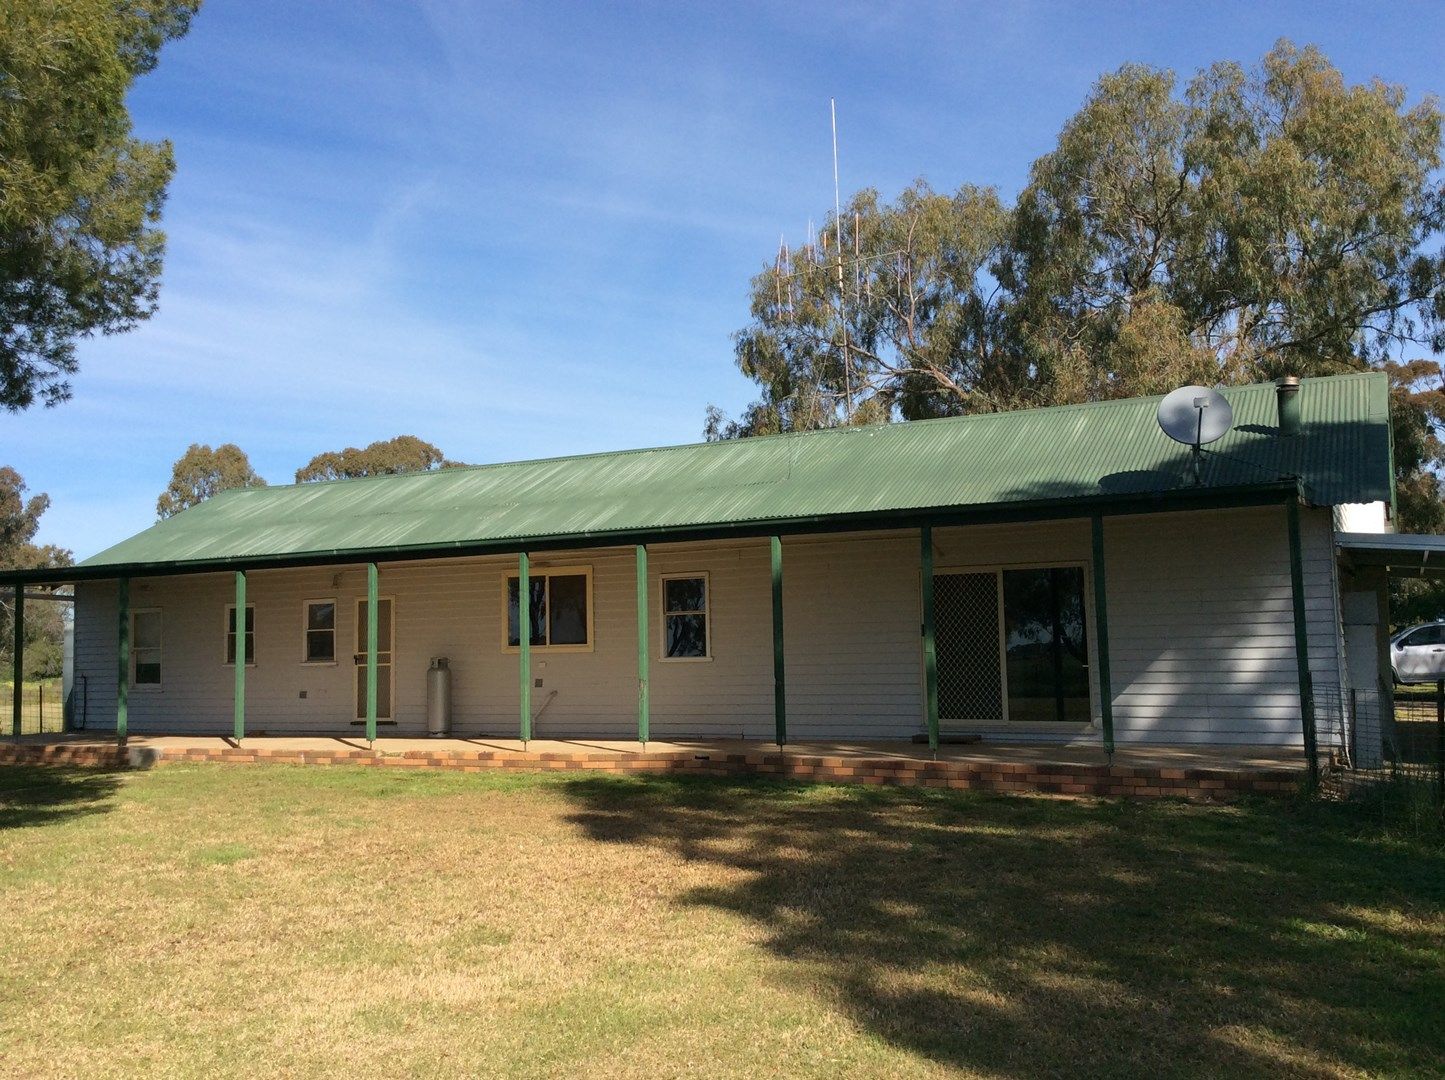 4 bedrooms Acreage / Semi-Rural in 1319 Woolshed Road TOCUMWAL NSW, 2714